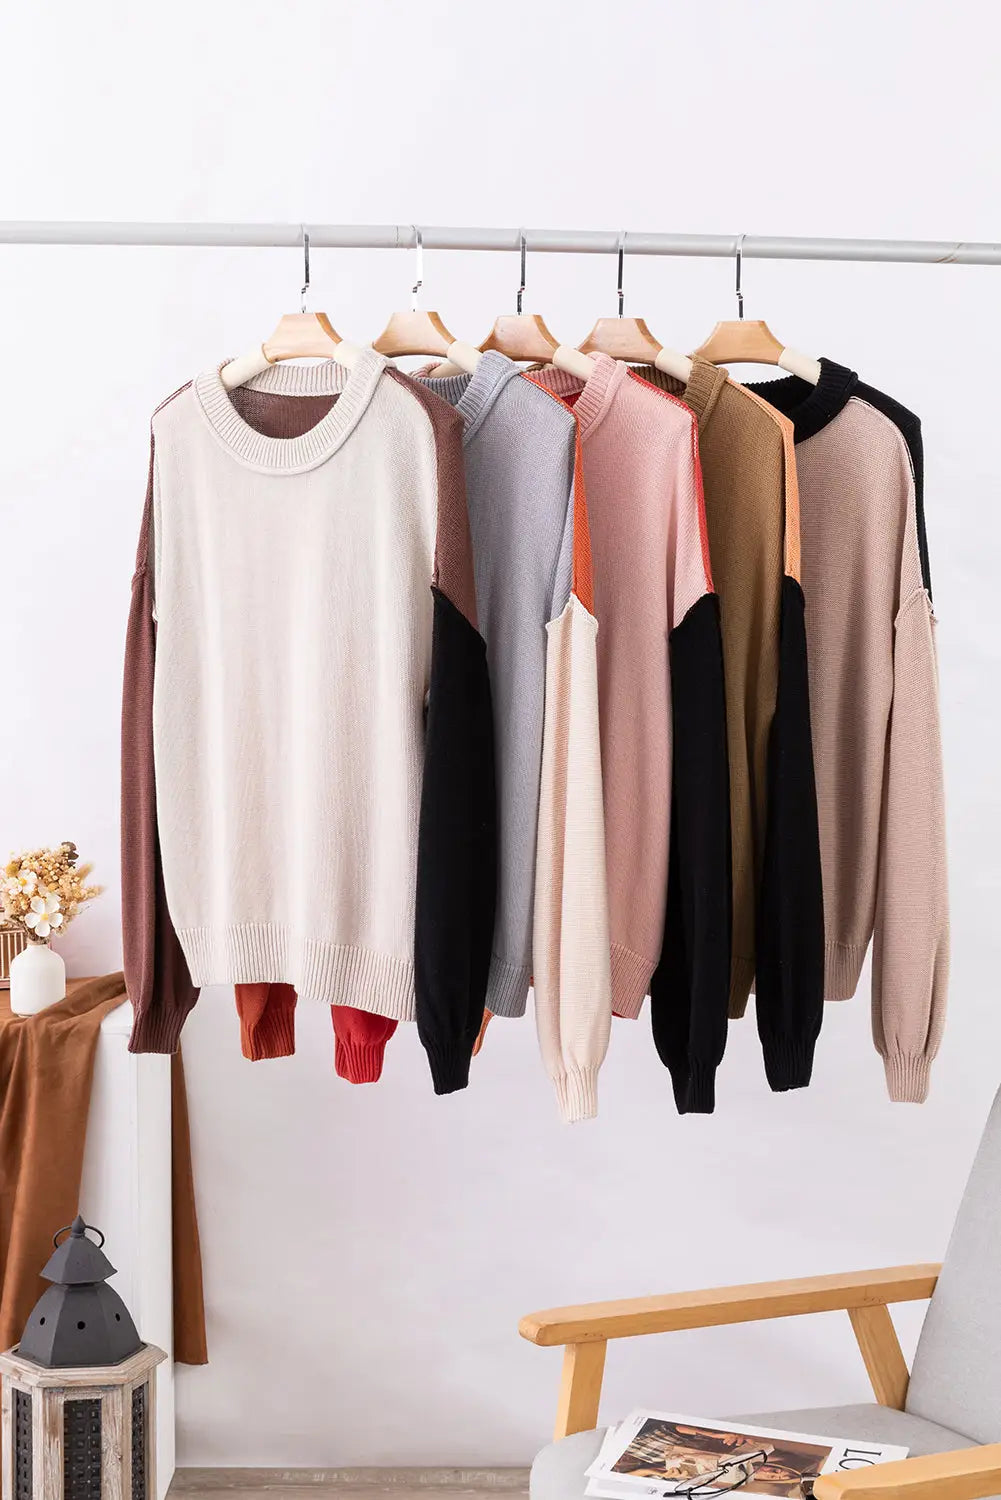 Coffee leopard print colorblock pullover sweater - tops